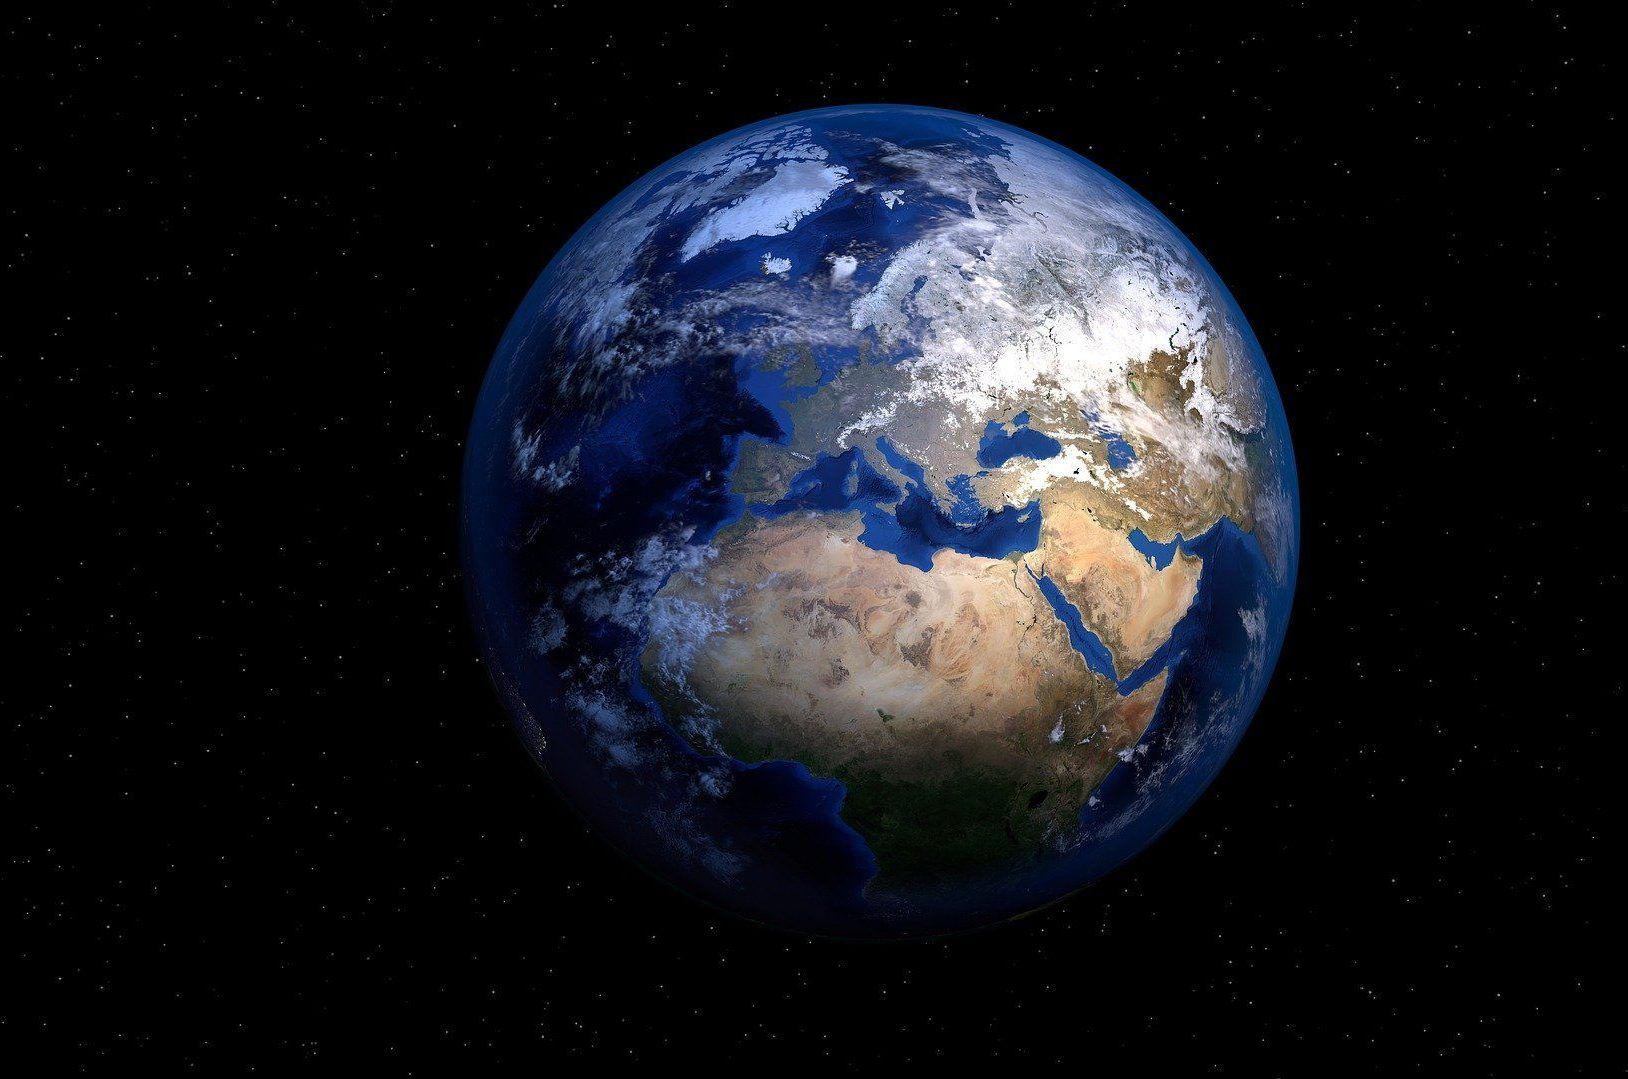 earth-Image-by-PIRO4D-from-Pixabay-aspect-ratio-540-358